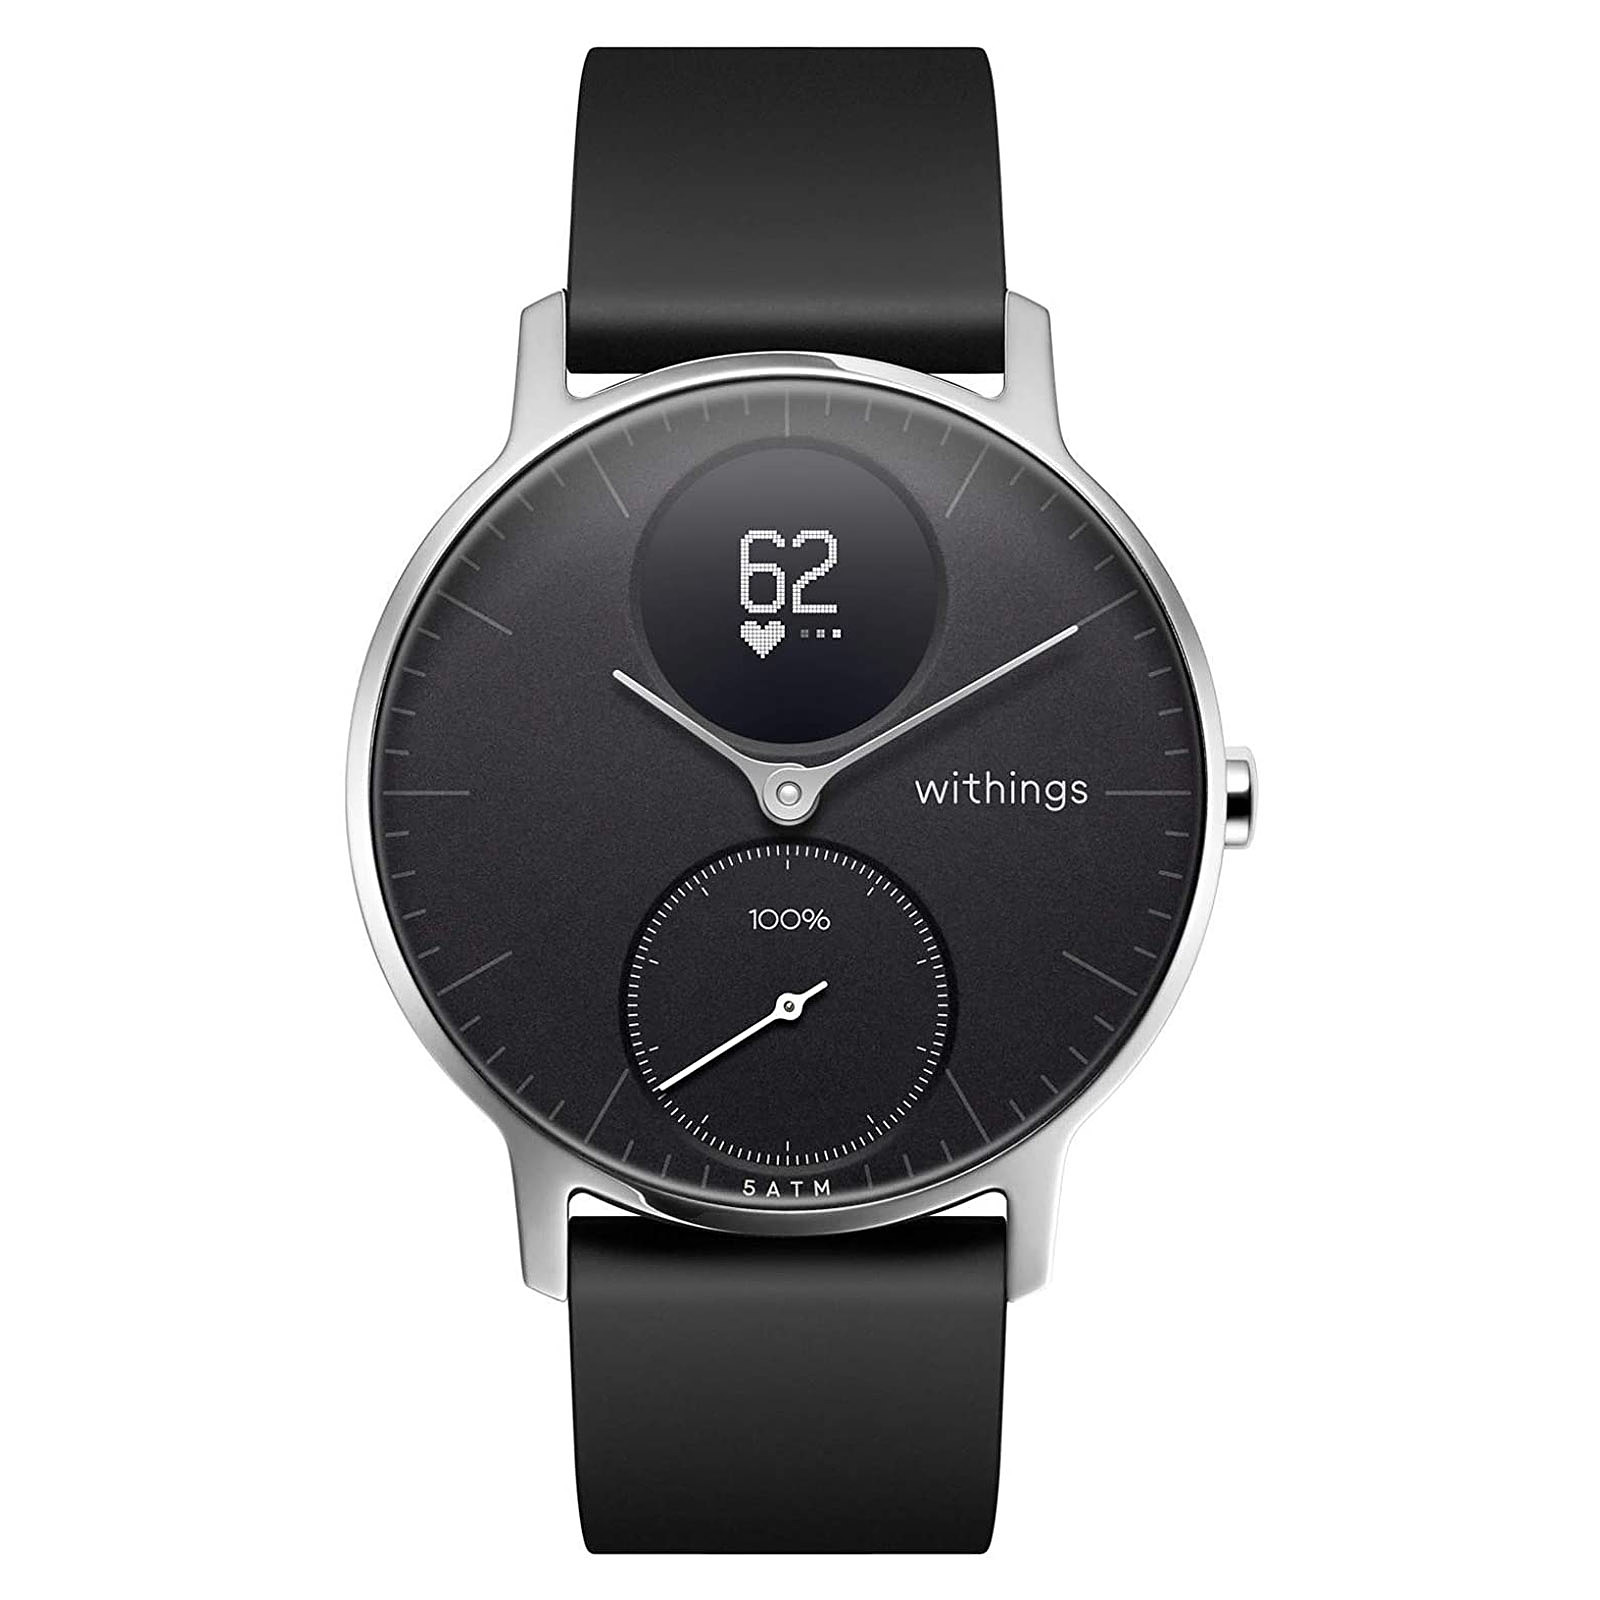 Withings Montre Connectee Capteur d'activite Frequence Cardiaque Steel Noir - Montre connectee Withings